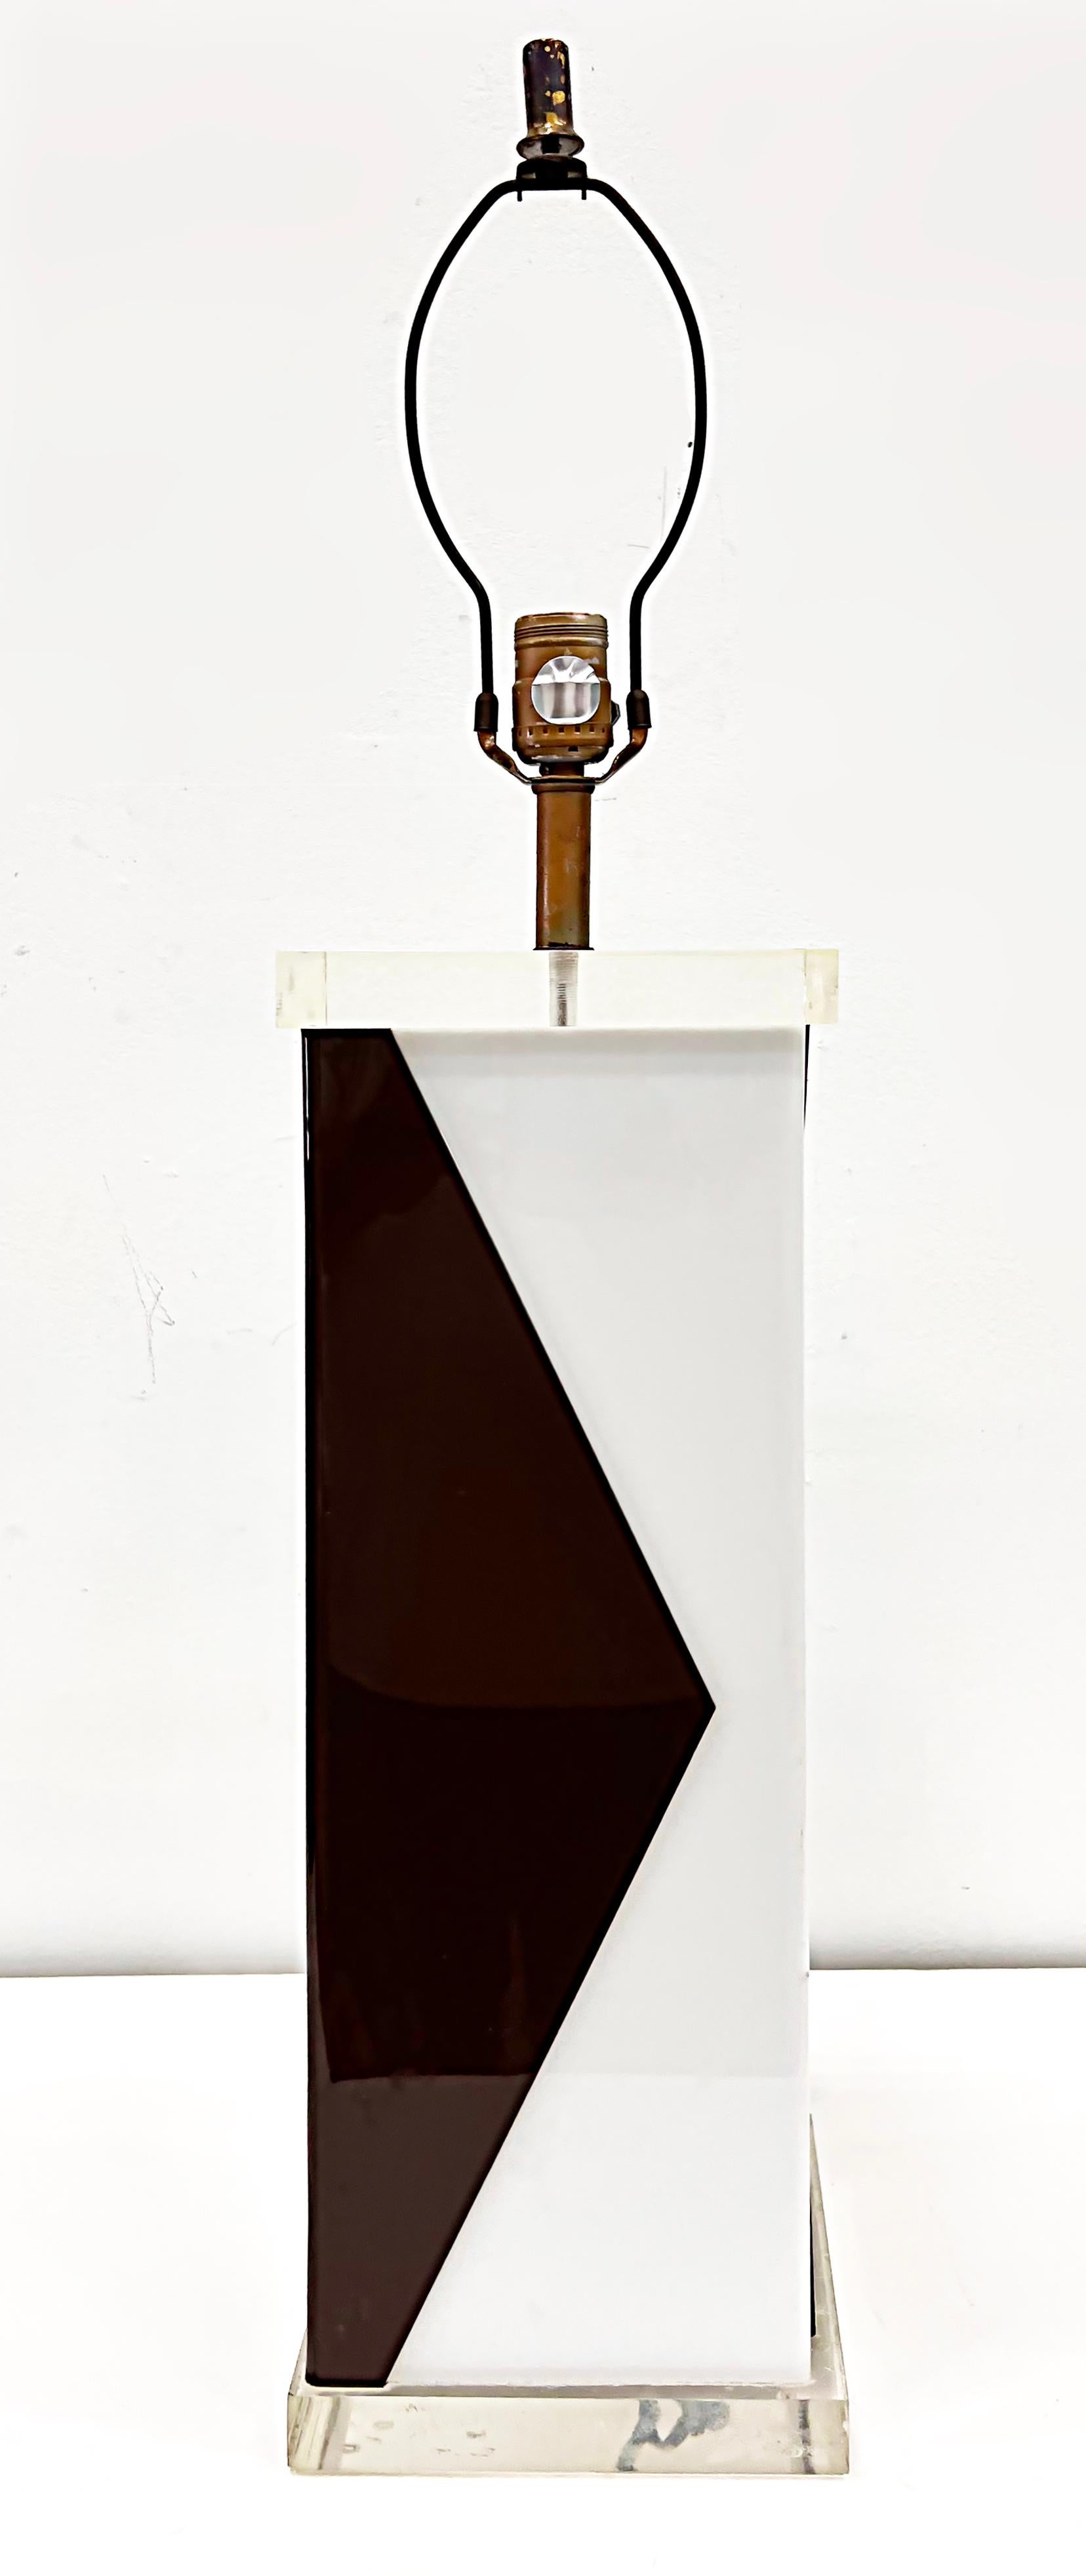 1970s Overscale Geometric Lucite and Acrylic Lamp

Offered for sale is an overscale 1970s Lucite and two-tone acrylic lamp that has been created in a geometric design.  The lamp's body is chocolate brown and white acrylic with a Lucite cap and a